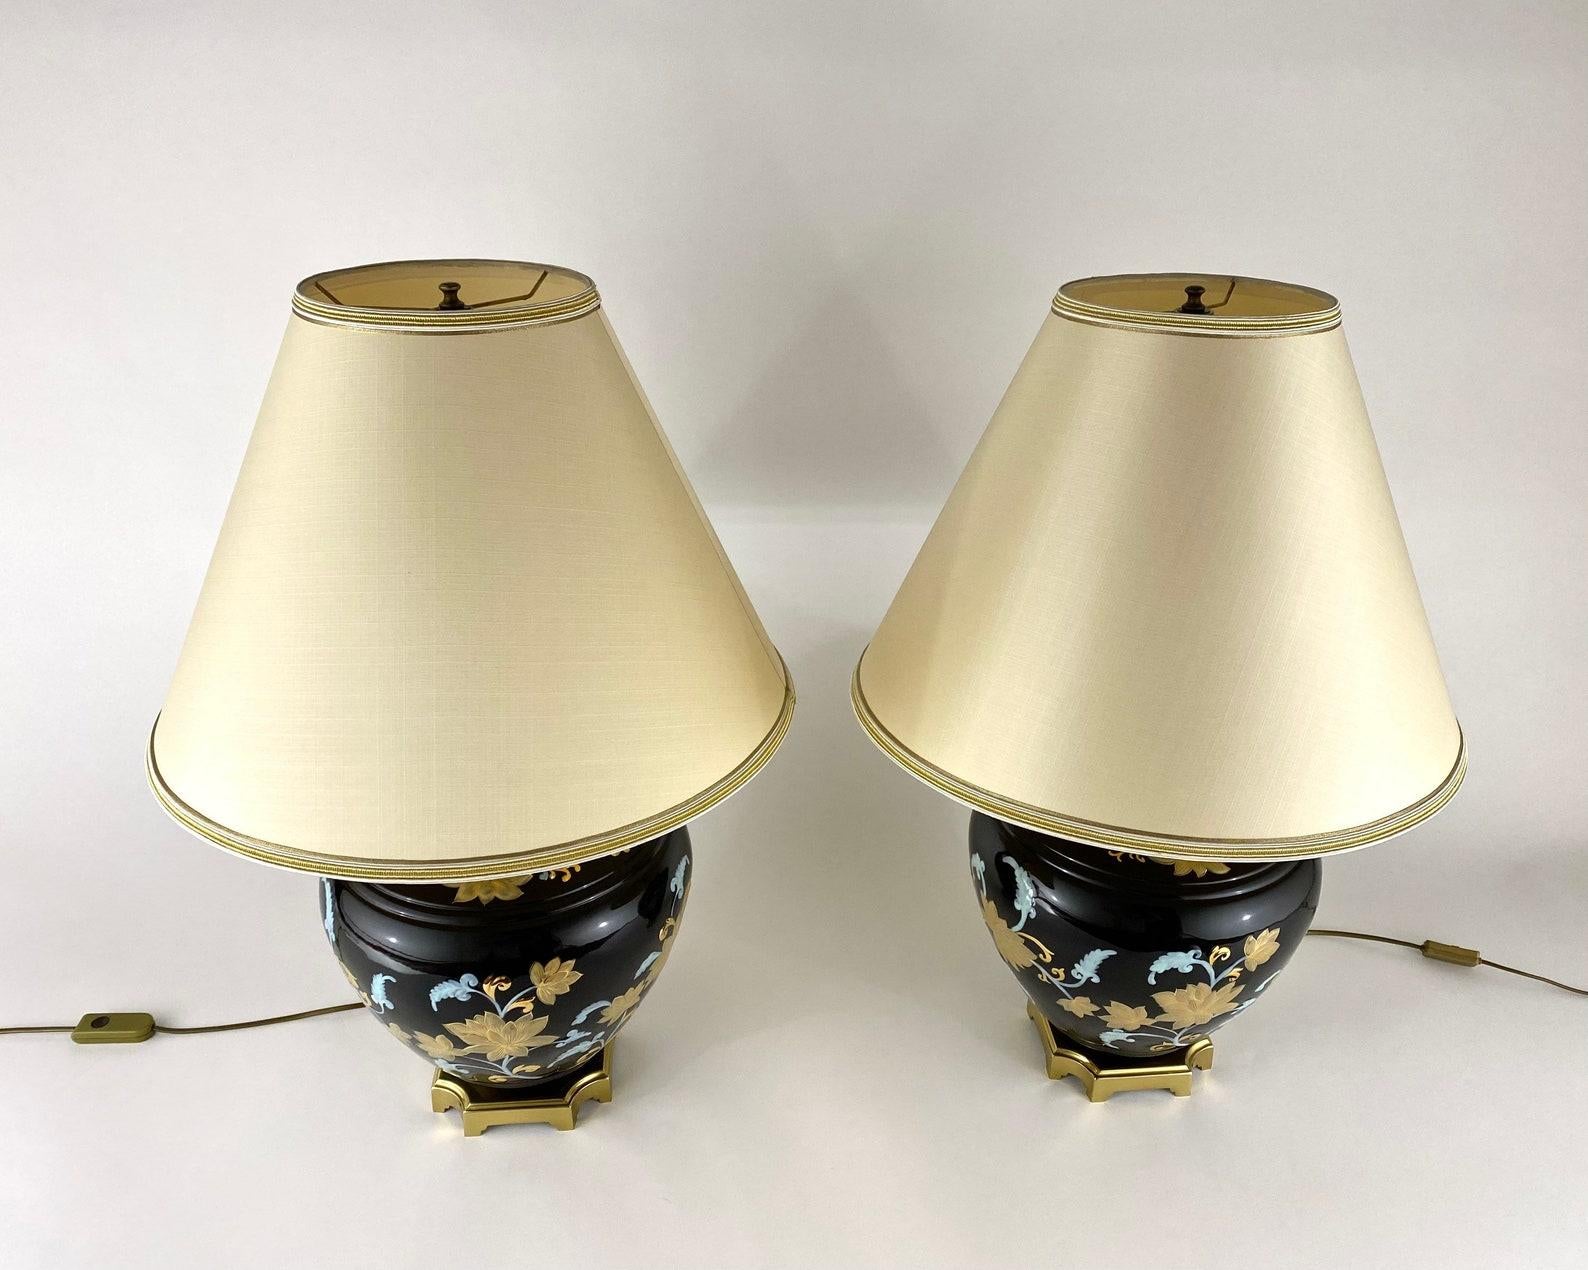 Vintage Pair Of Table Lamps 1980s  Bronze And Porcelain Paired Lamps, France In Excellent Condition For Sale In Bastogne, BE